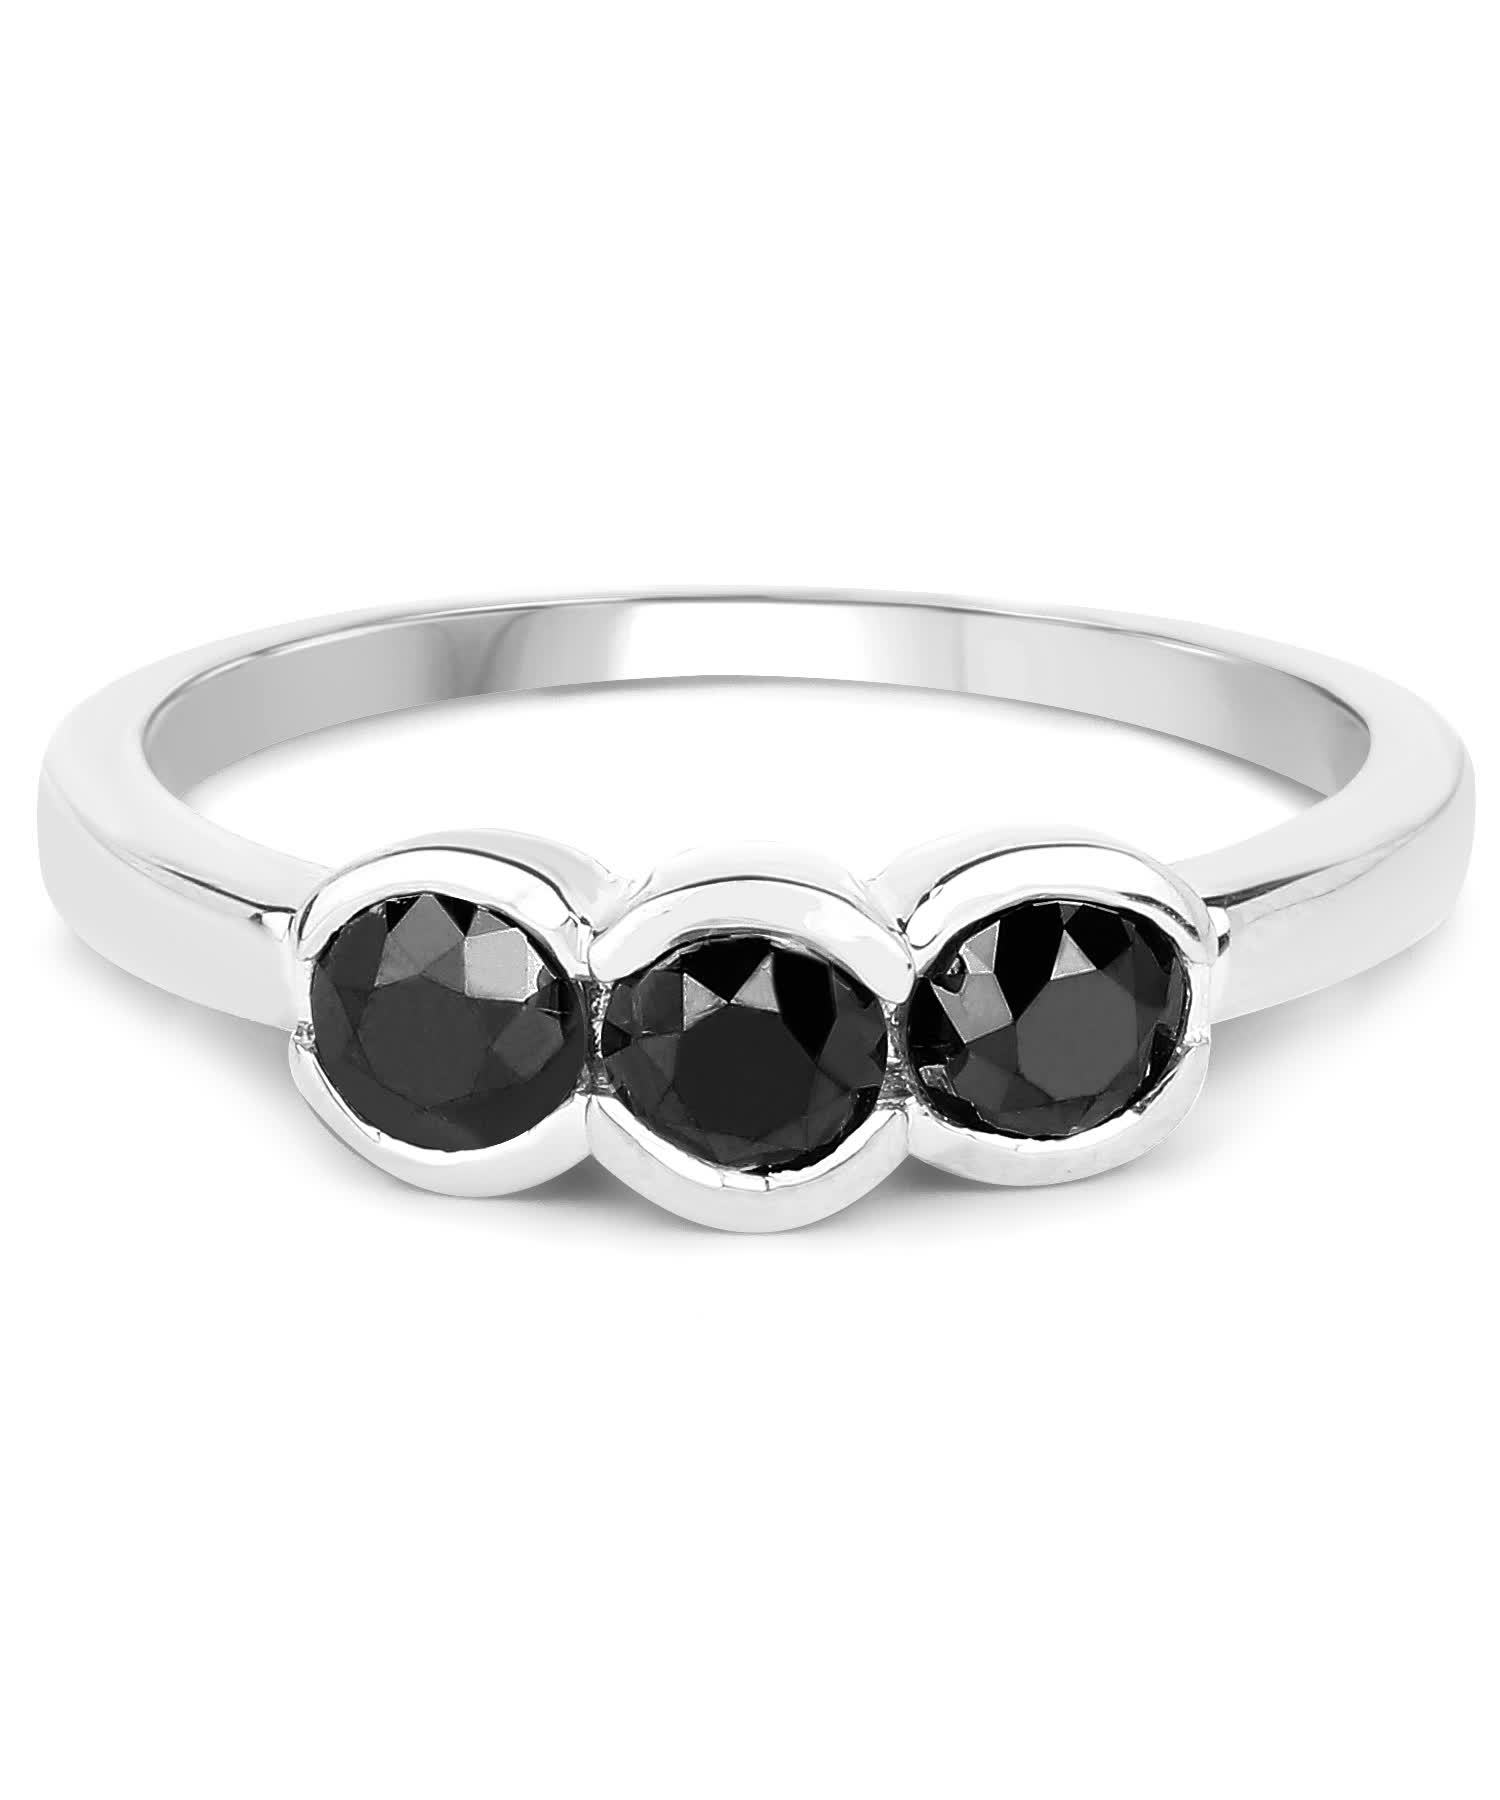 1.16ctw Natural Black Diamond Rhodium Plated 925 Sterling Silver Three-Stone Ring View 3